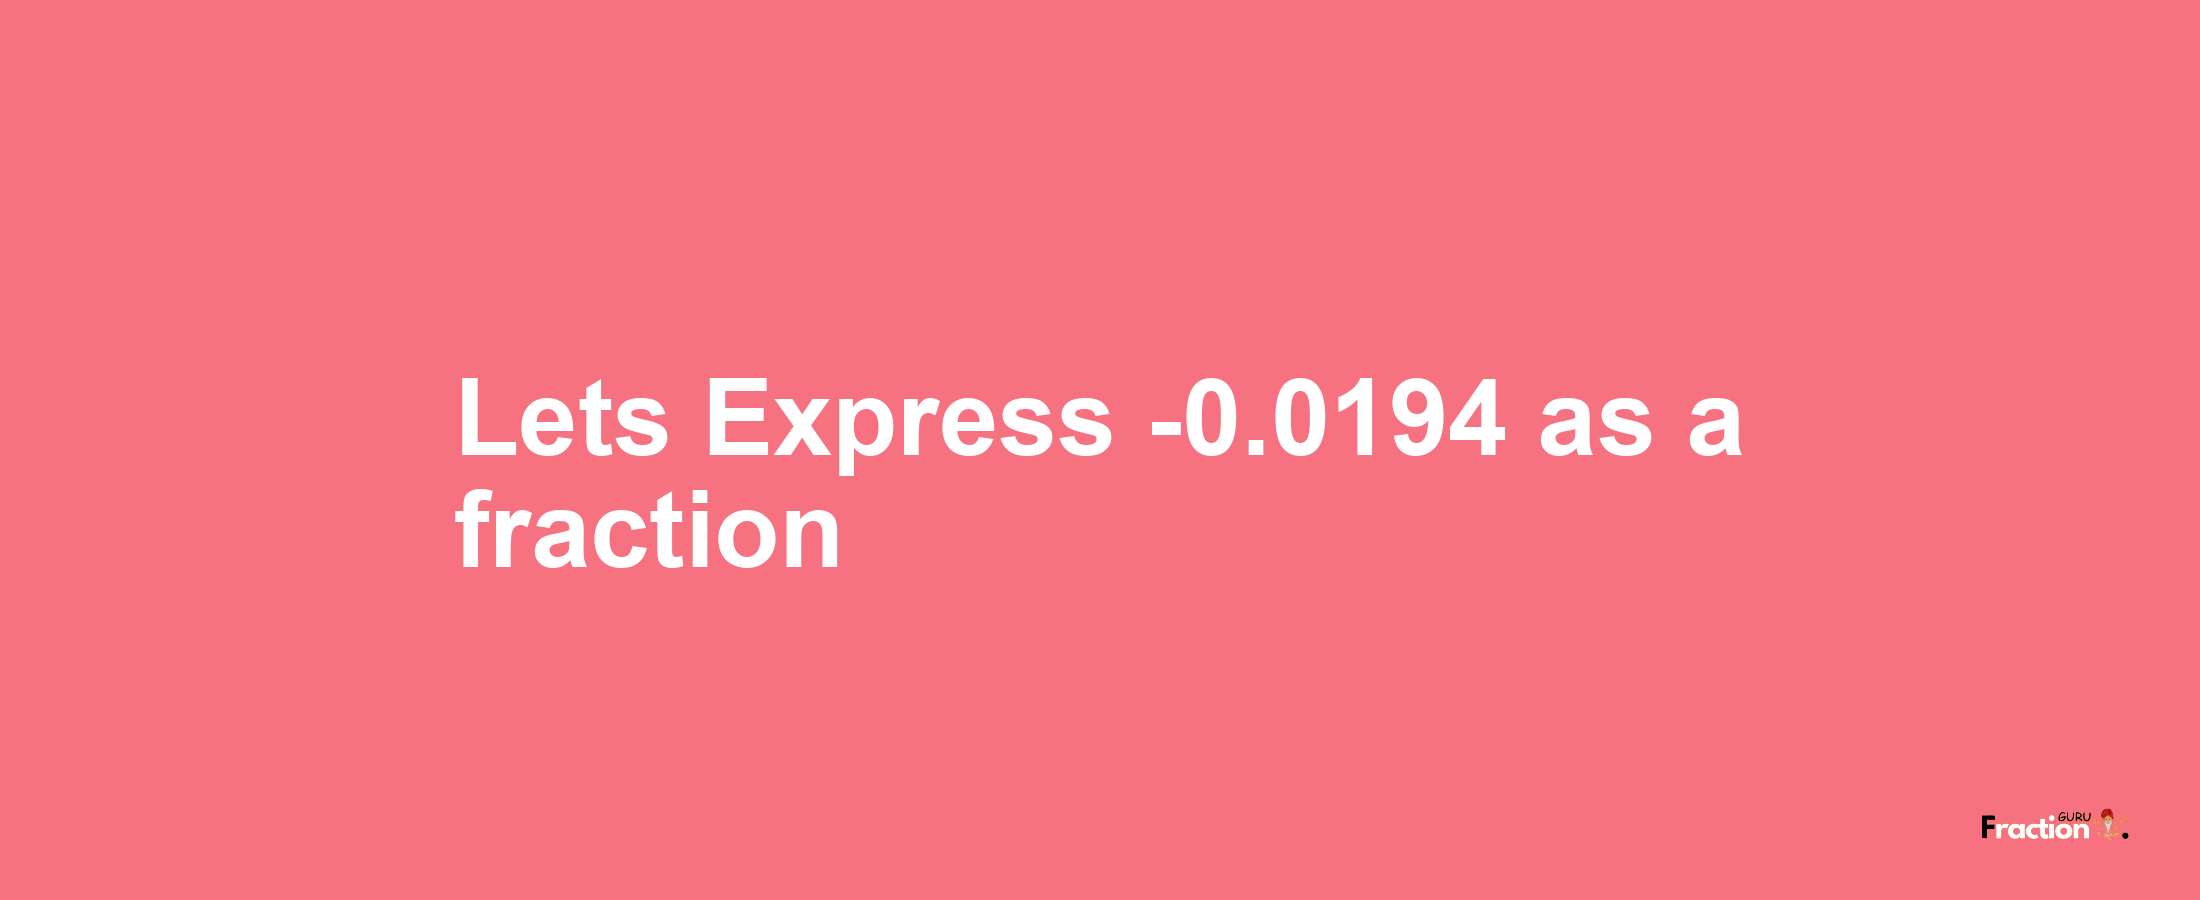 Lets Express -0.0194 as afraction